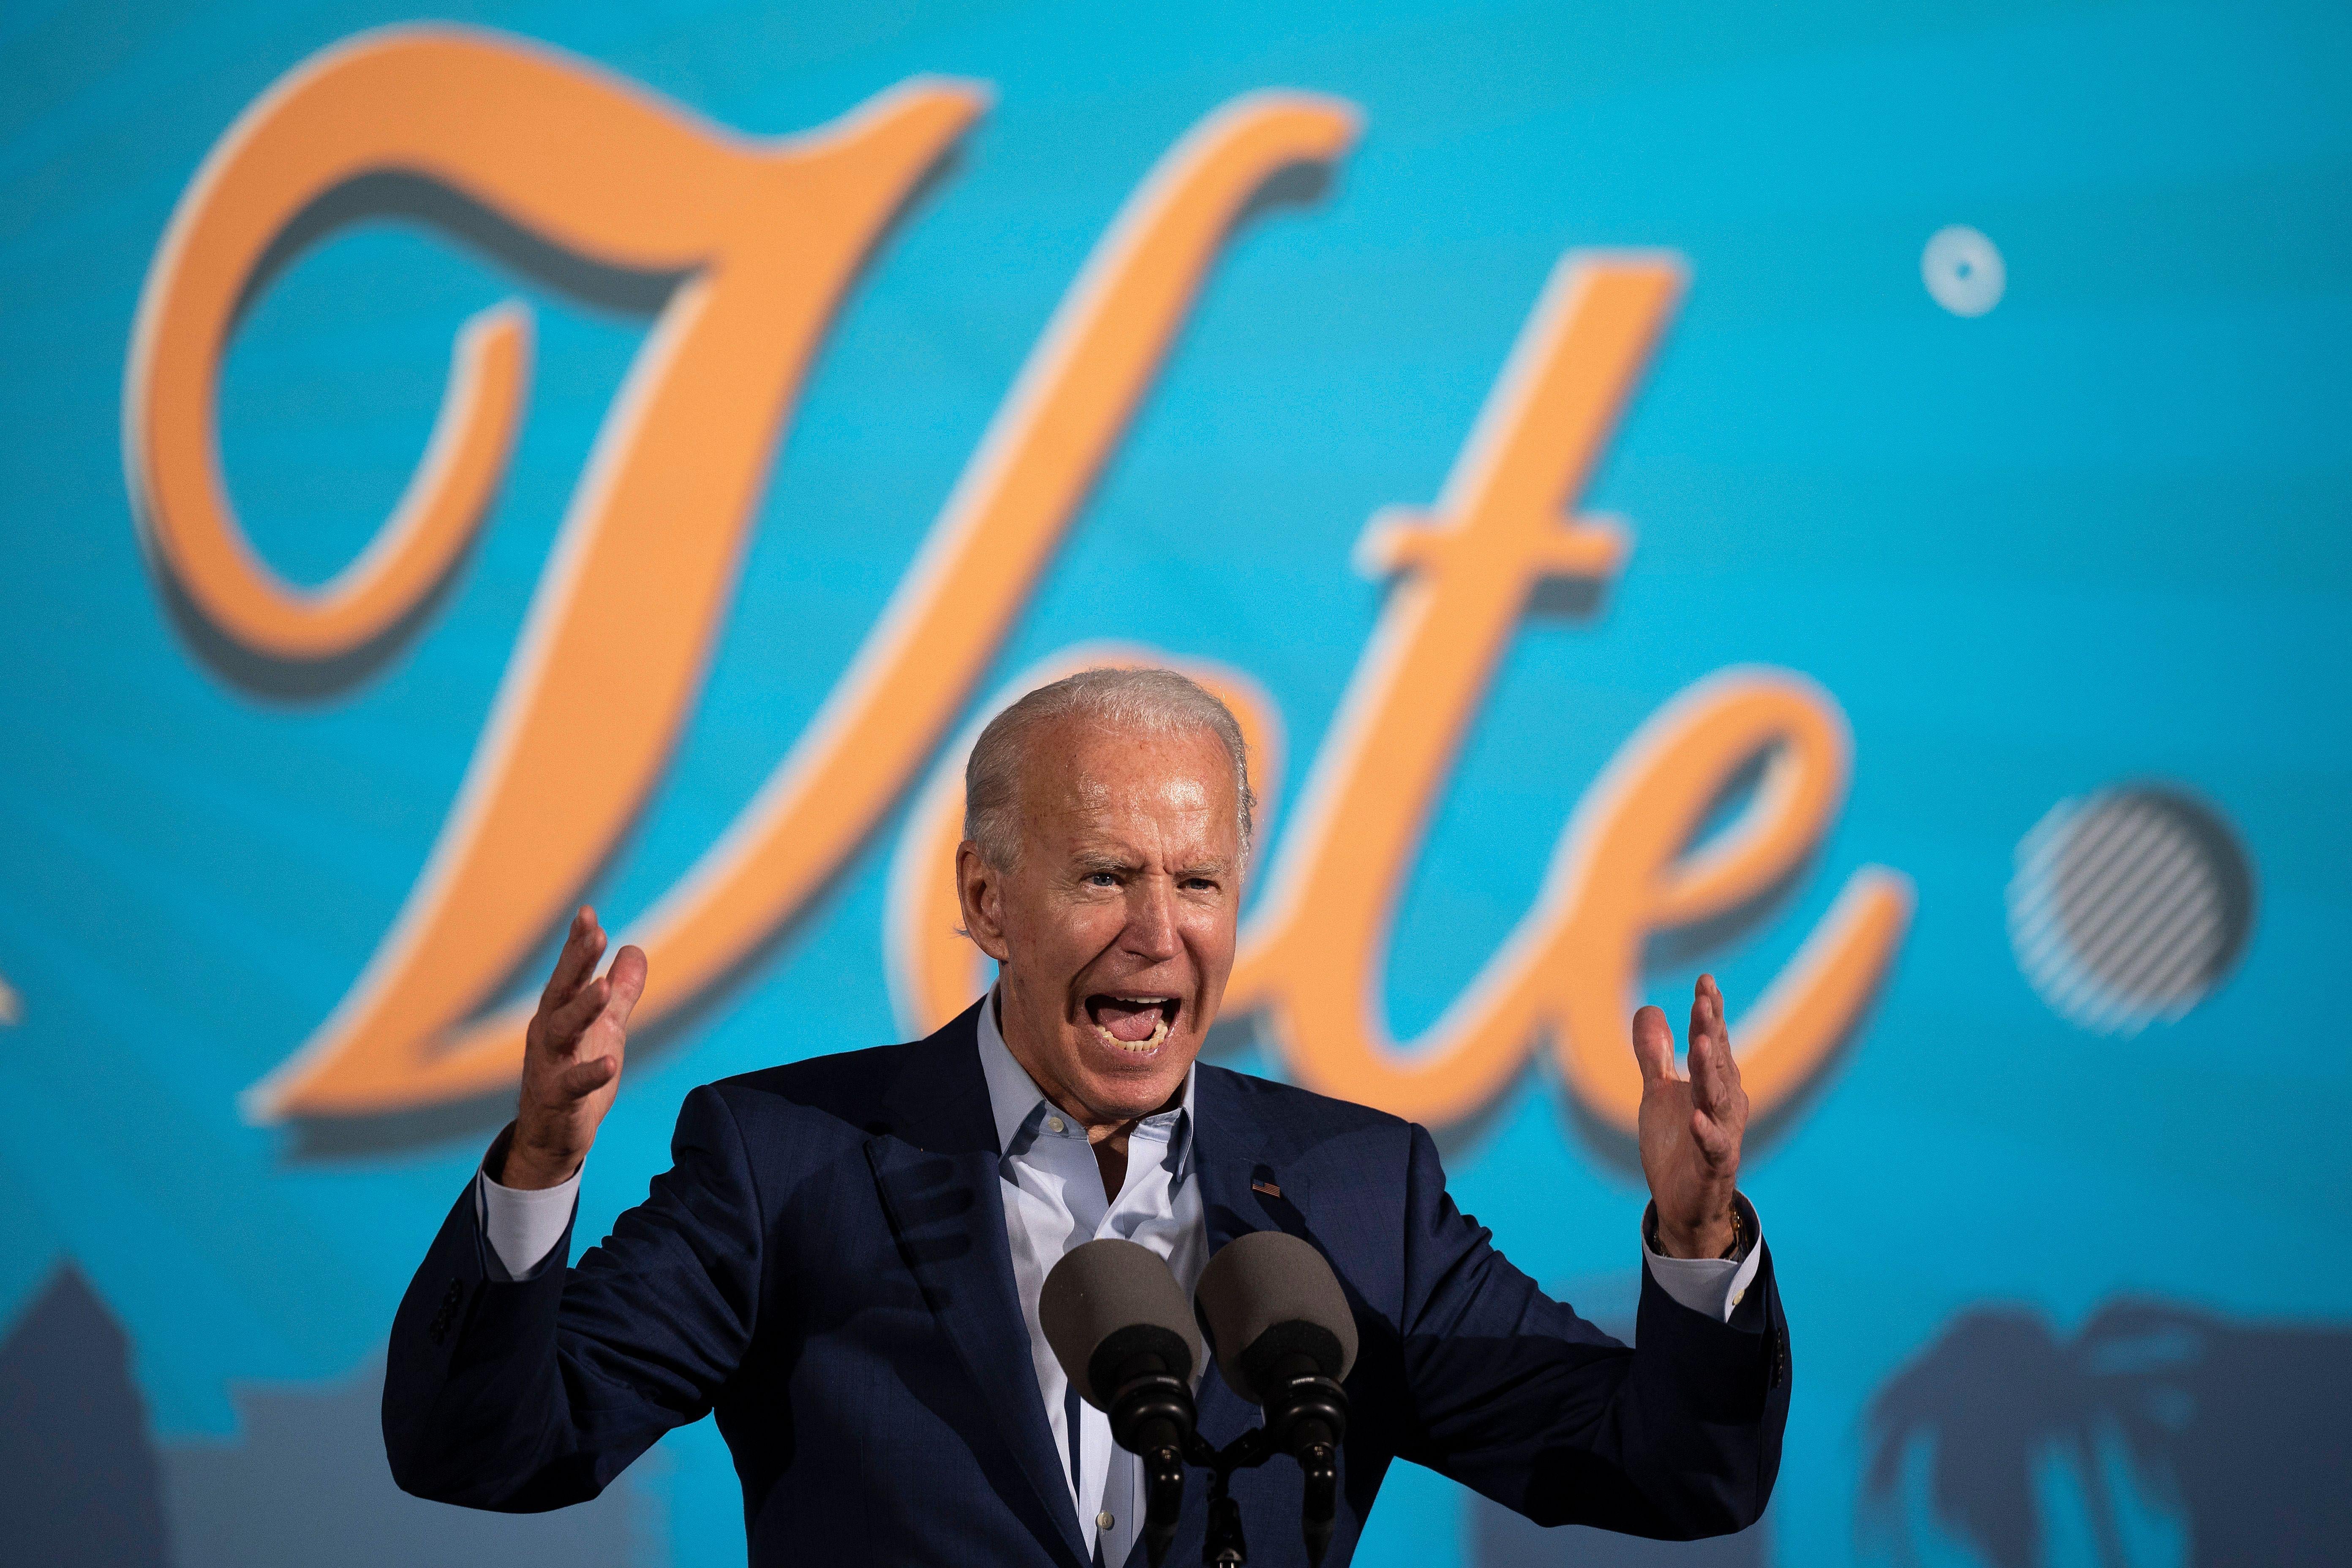 Biden stands with his arms raised, shouting at a mic. The word "vote" is on a backdrop behind him.